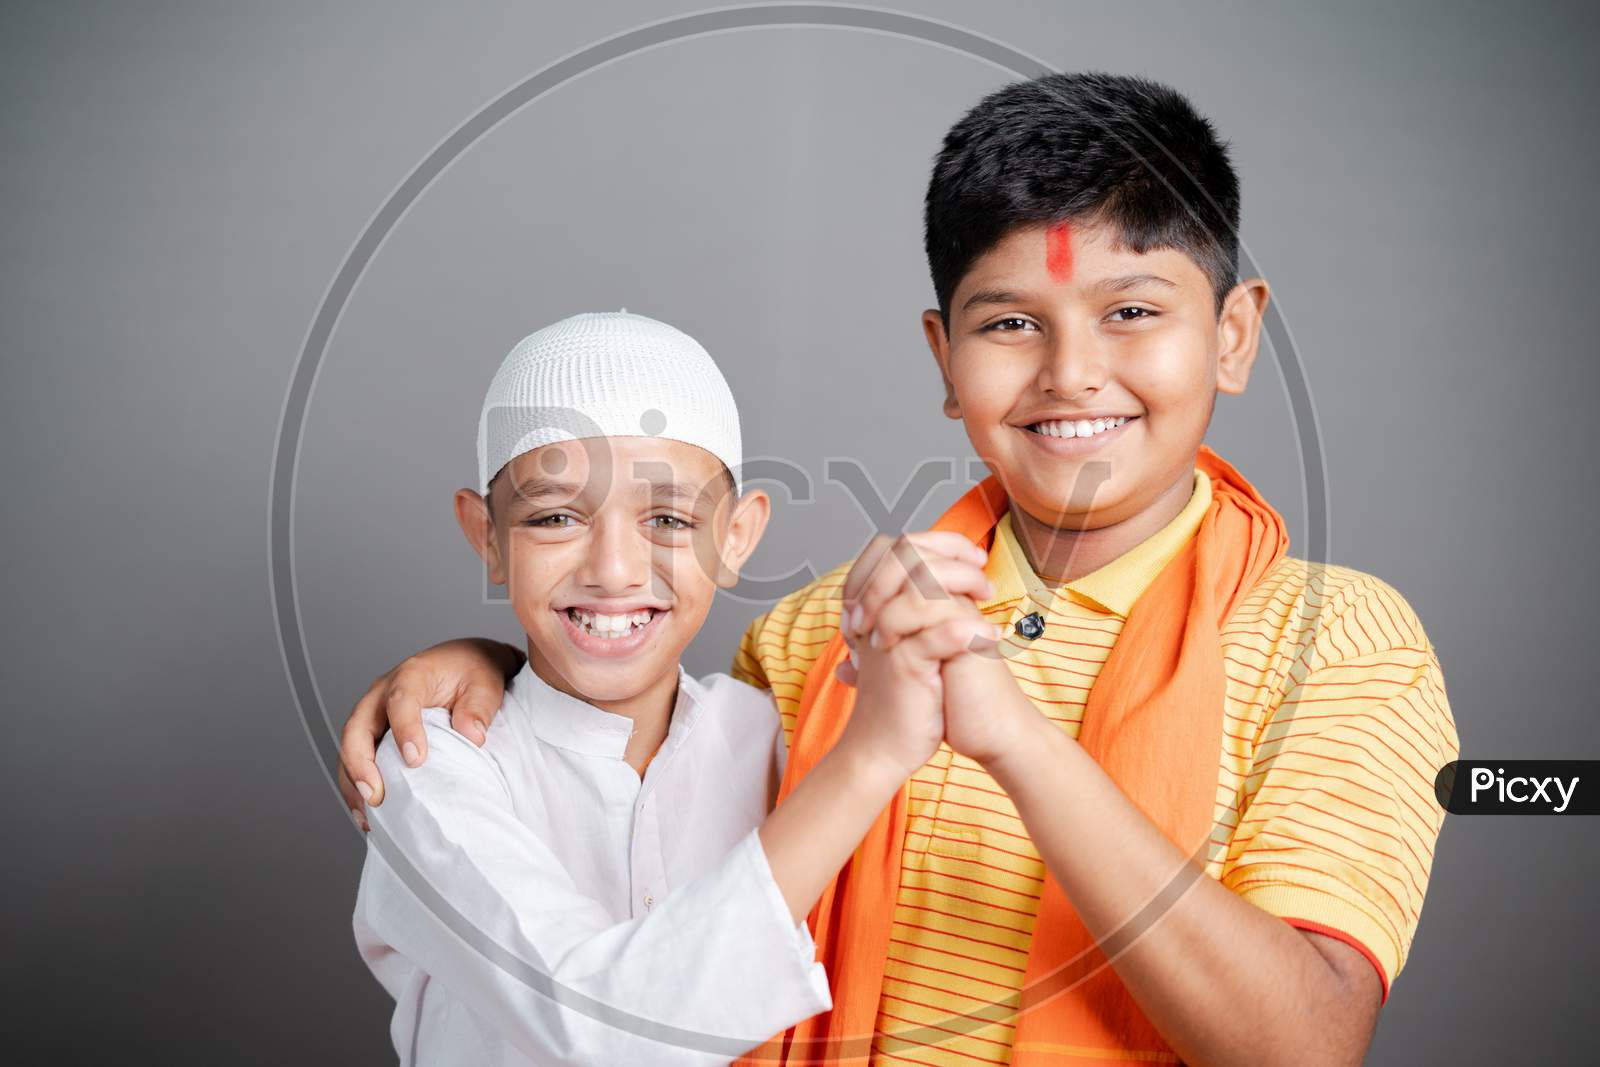 Happy Hindu Muslim Kids Showing Unity By Holding Hands Together By Looking At Camera On Gray Background - Concept Of Diversity, Bonding And Multiethnic Friendship.